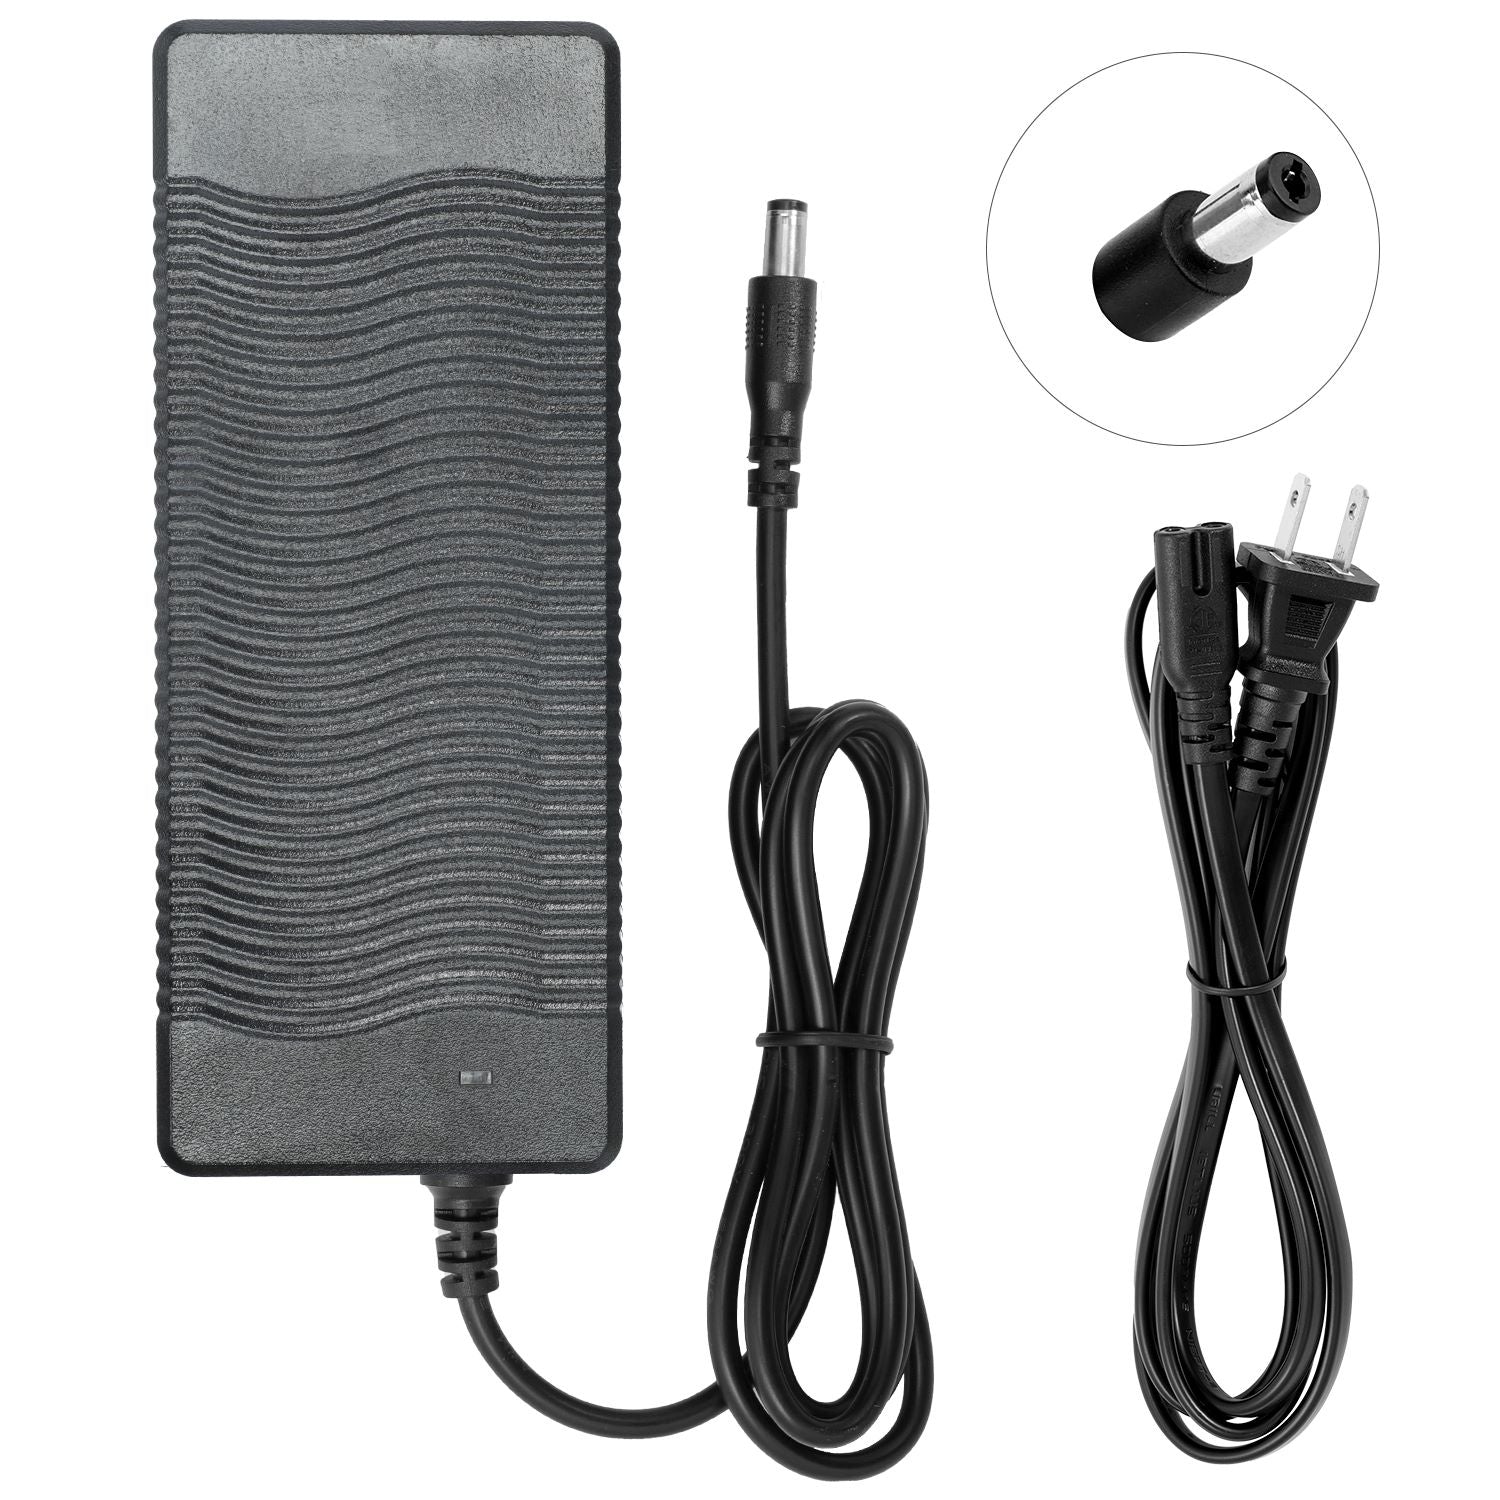 UL Listed Charger for AVENTON SINCH E-Bike (If your AVENTON model is something else, do NOT order it)